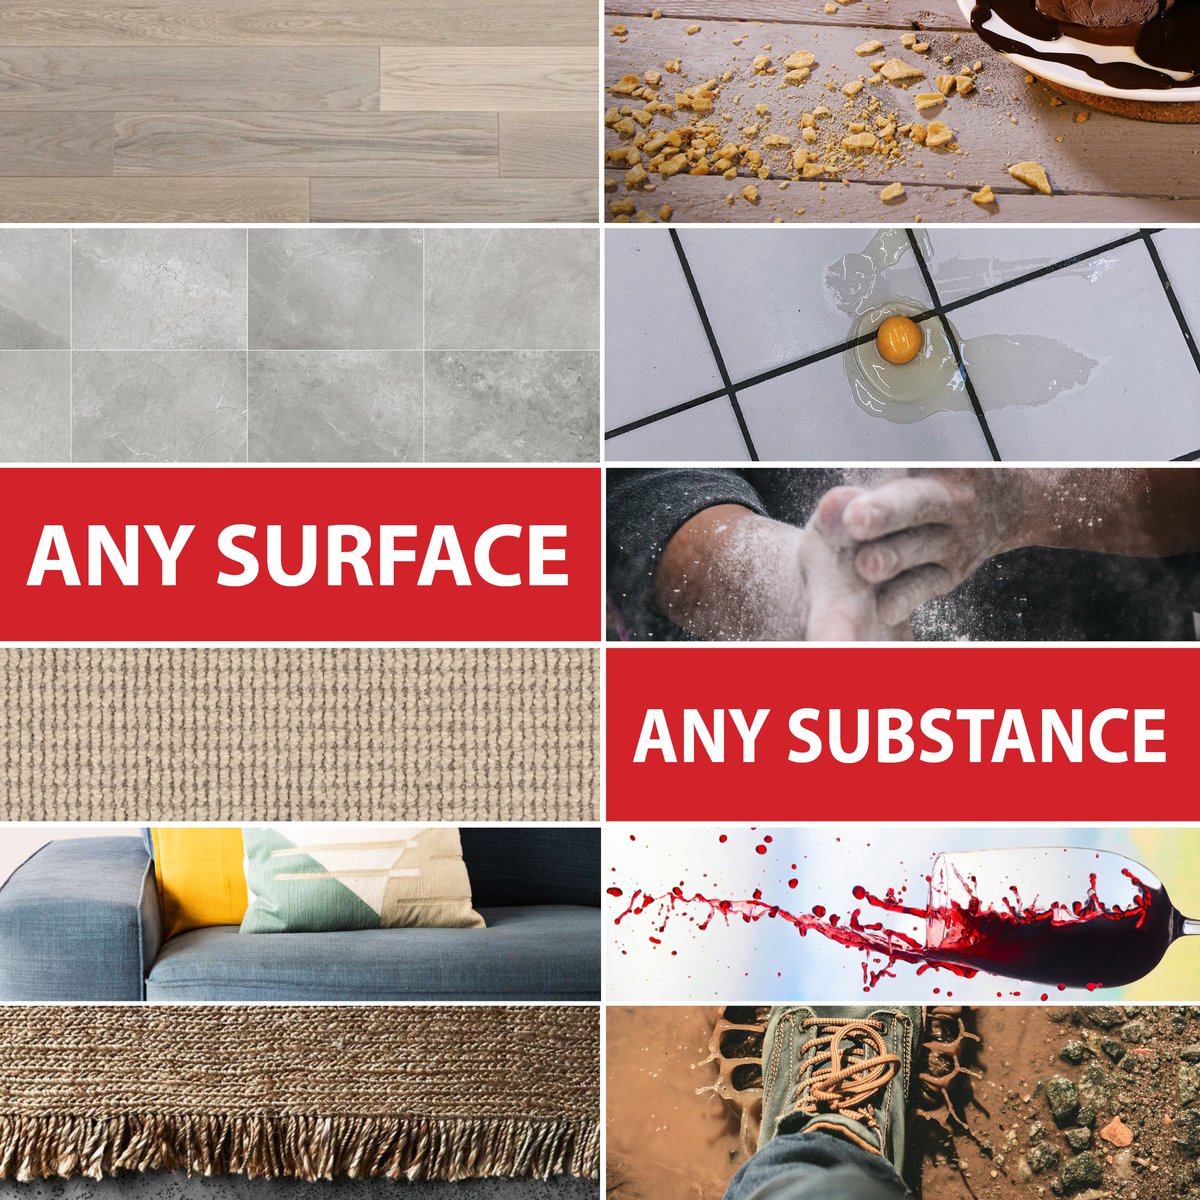 Suuuck any substance from any surface! #DrainVac #Kudos #tiles #hardfloors #carpet #upholstery #rugs #concrete #wine #liquids #mud #flour #egg #spill #cleaning #clean #dryandwet #crumbs #woodfloors #floorboards #centralvacuum #ductedvacuum #vacuum #mess